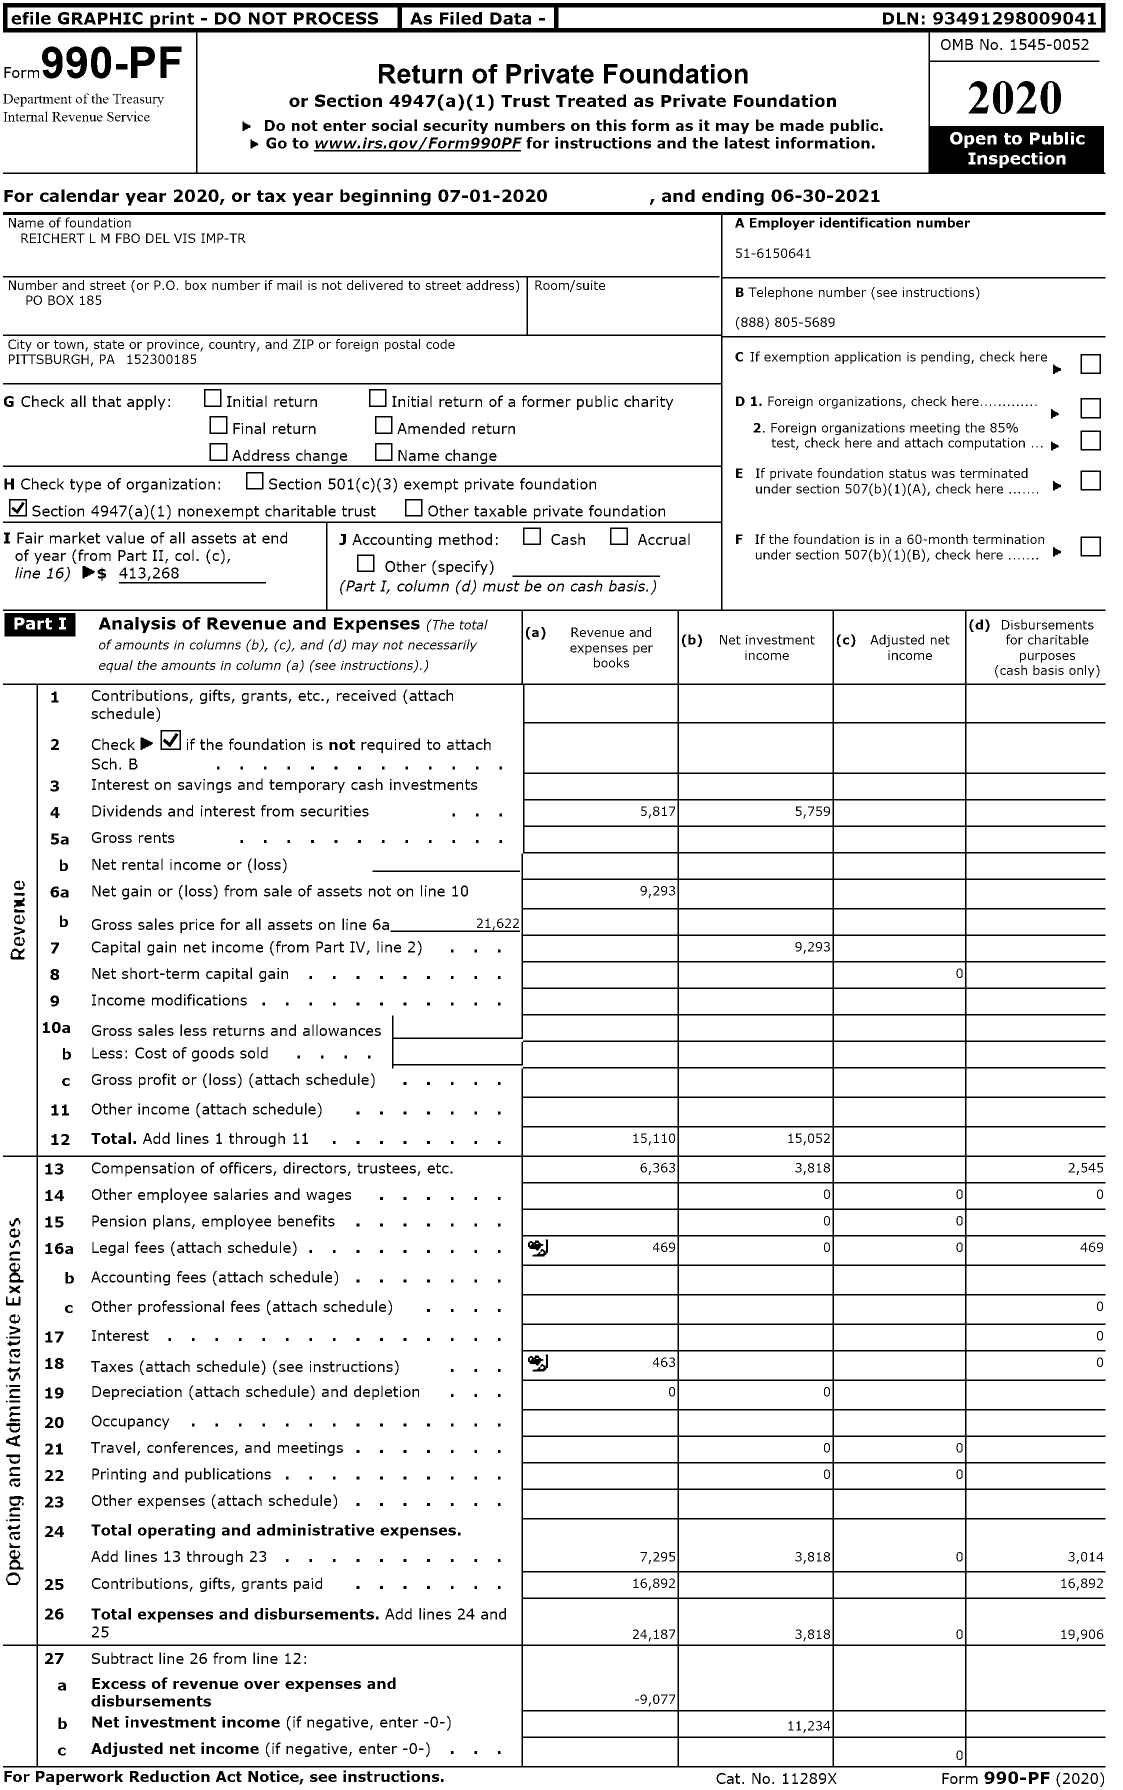 Image of first page of 2020 Form 990PF for Reichert L M Fbo Del Vis Imp-Tr